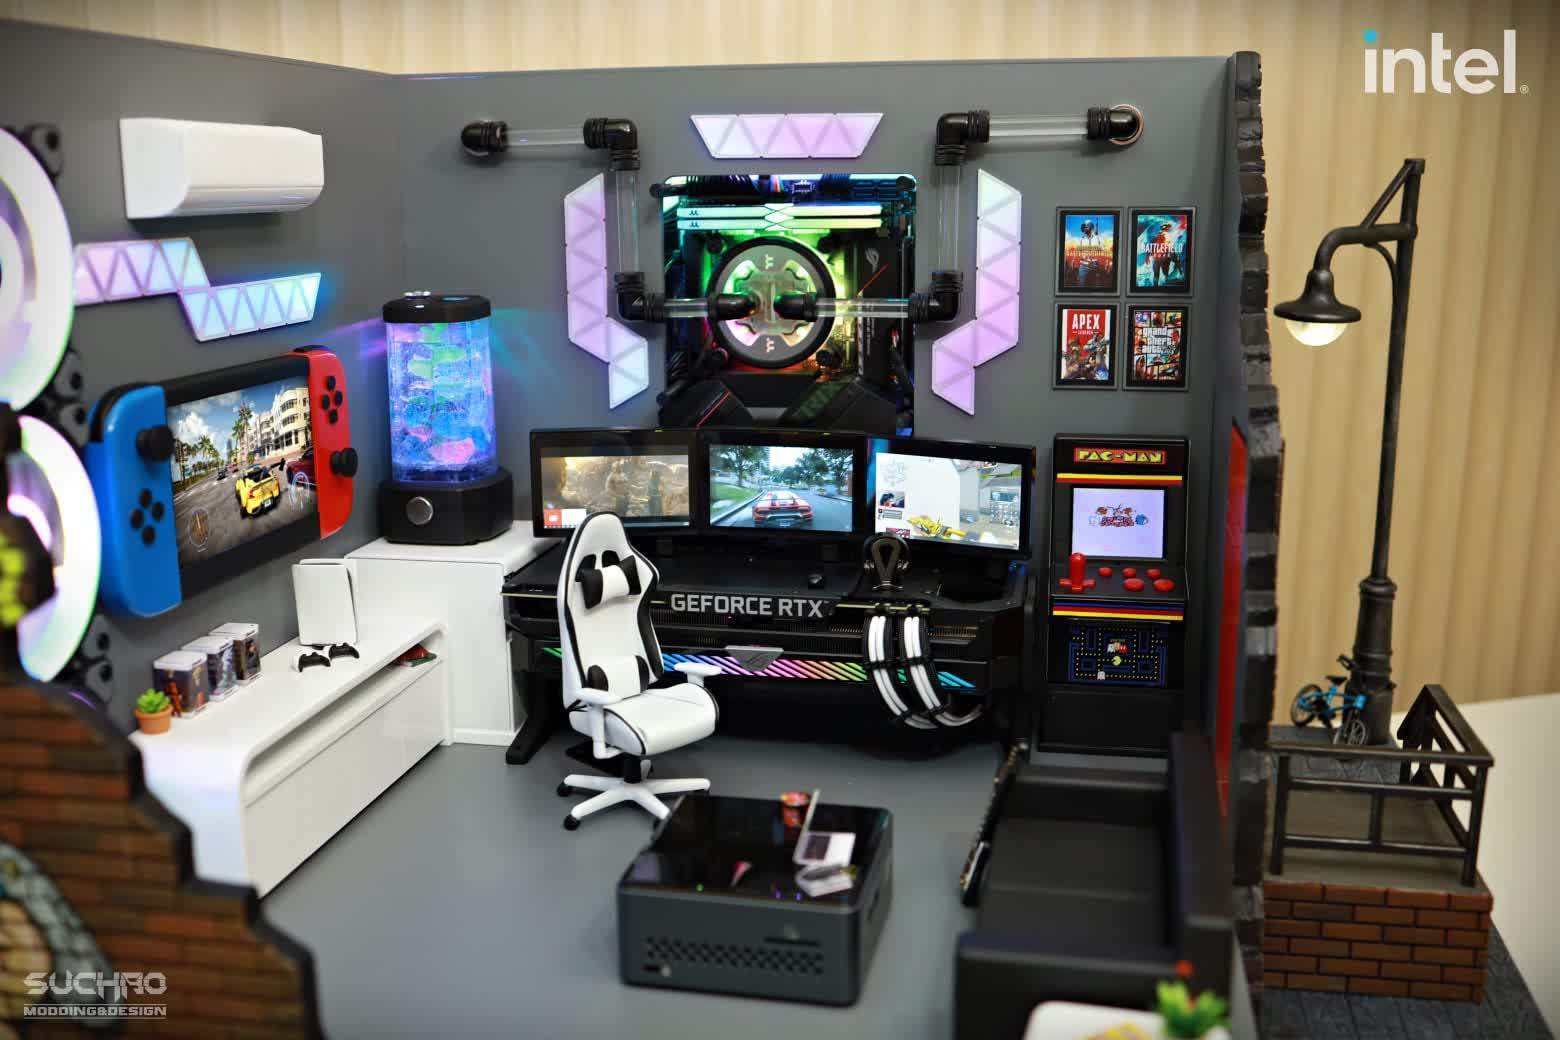 Check out this amazing custom PC designed to resemble a gamer's room